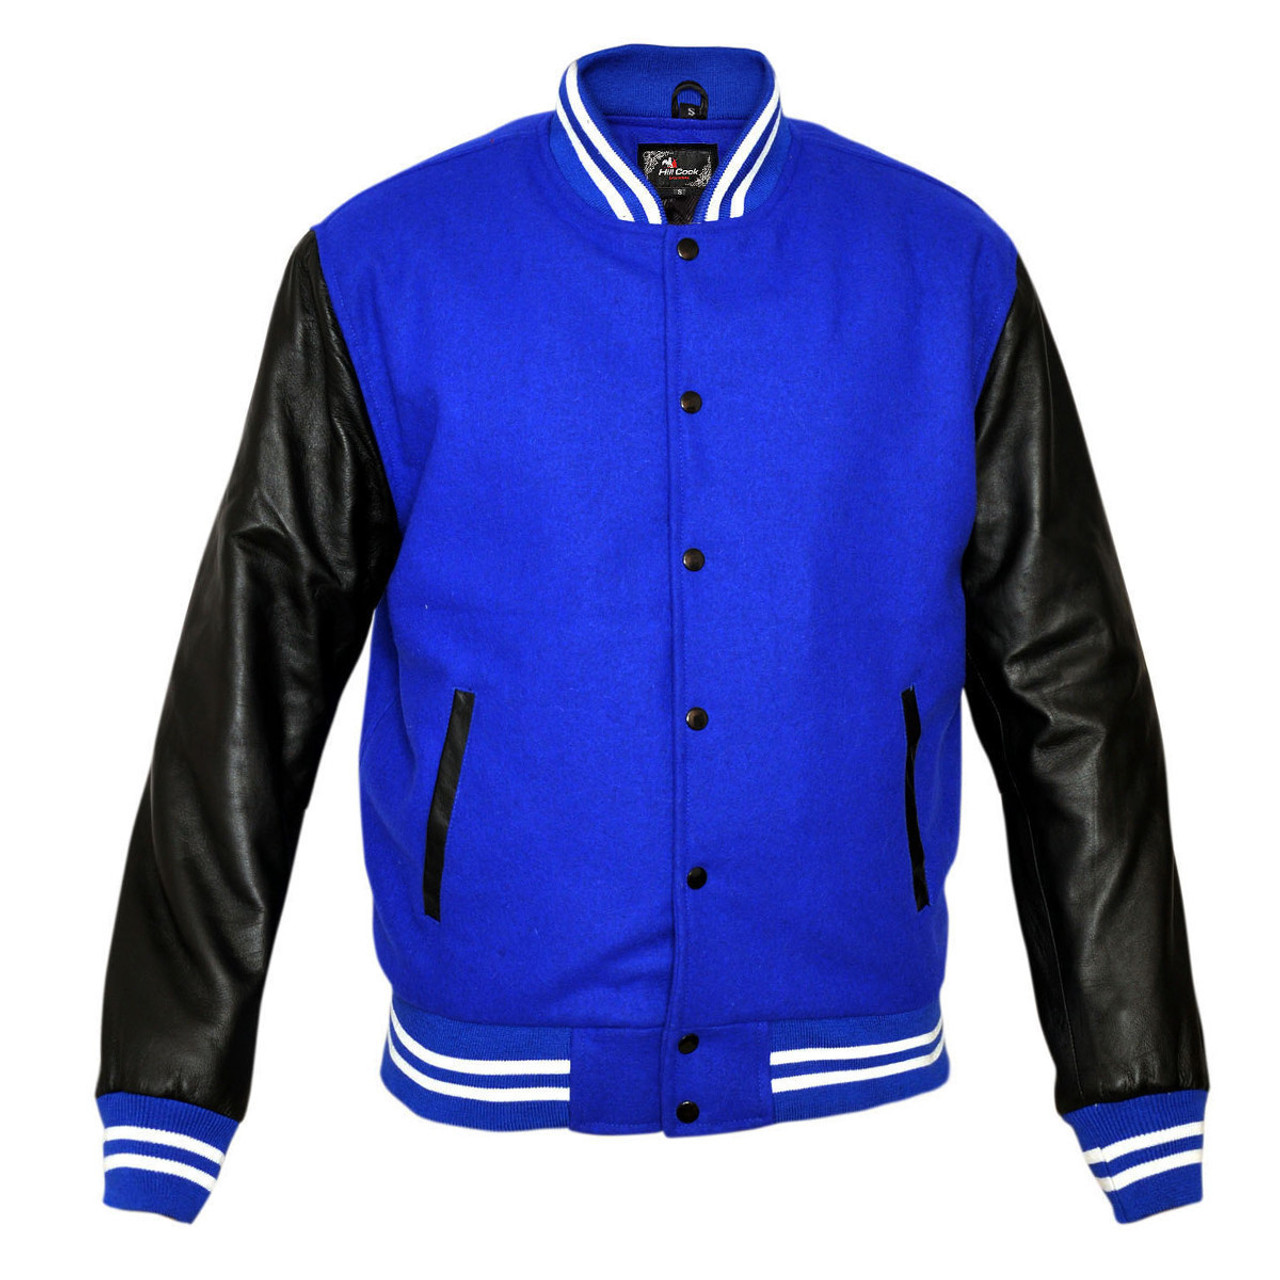 Men's Classic Wool And Leather Varsity Jacket [Black/Red